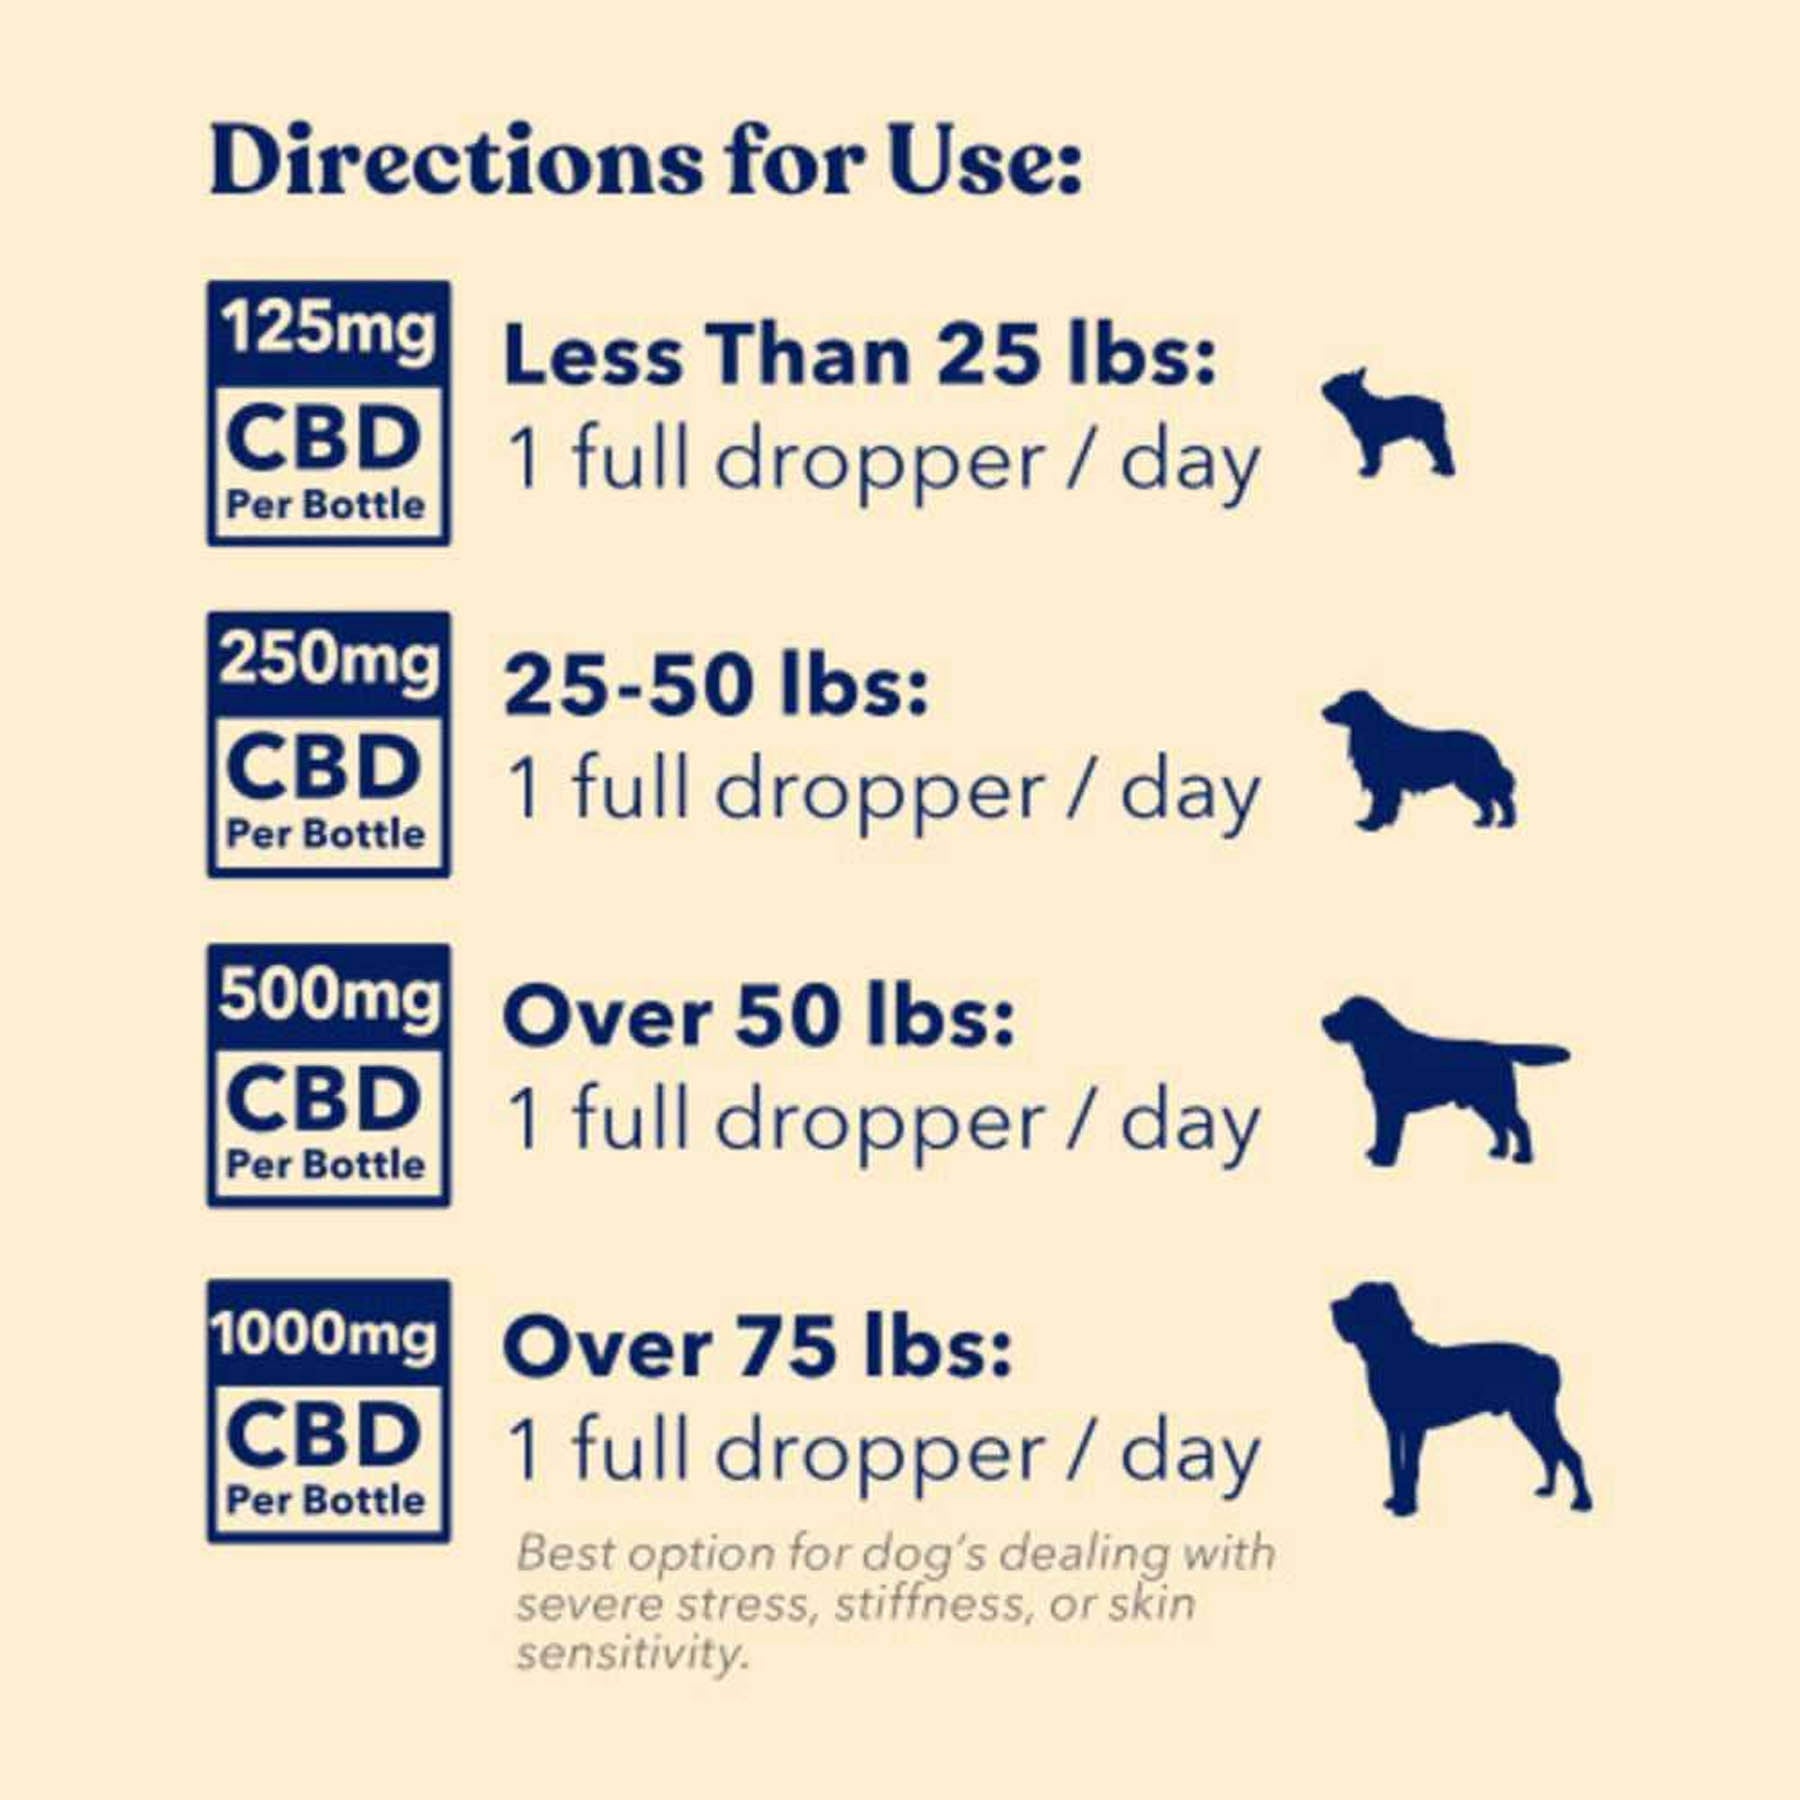 honest paws cbd oil dogs 250mg directions